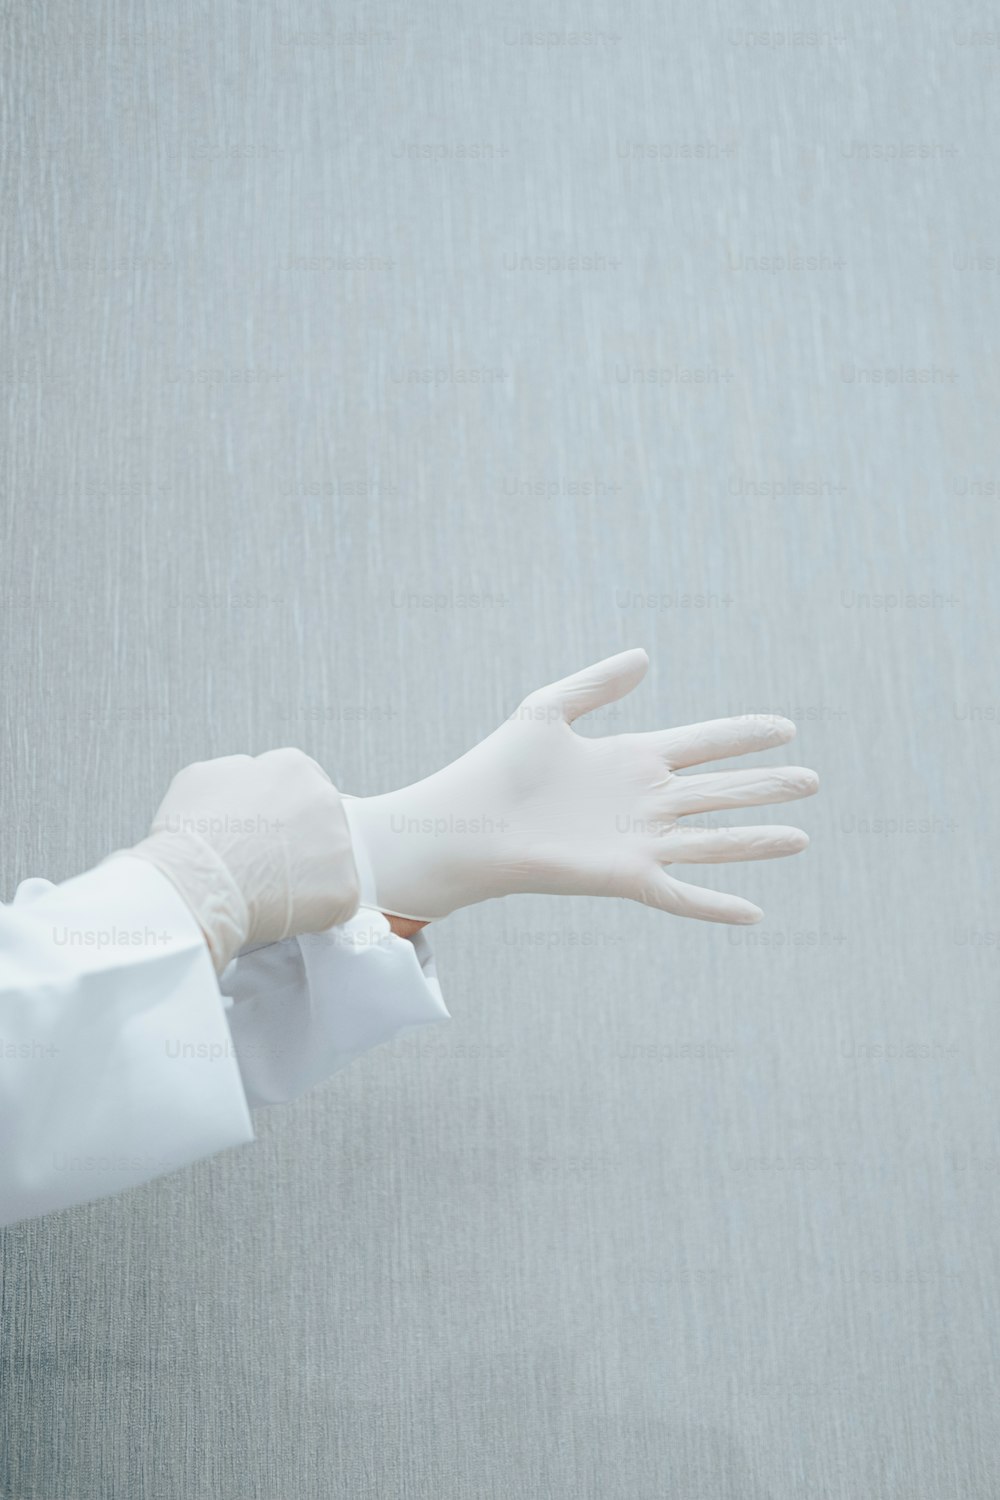 a gloved hand with a white glove on it